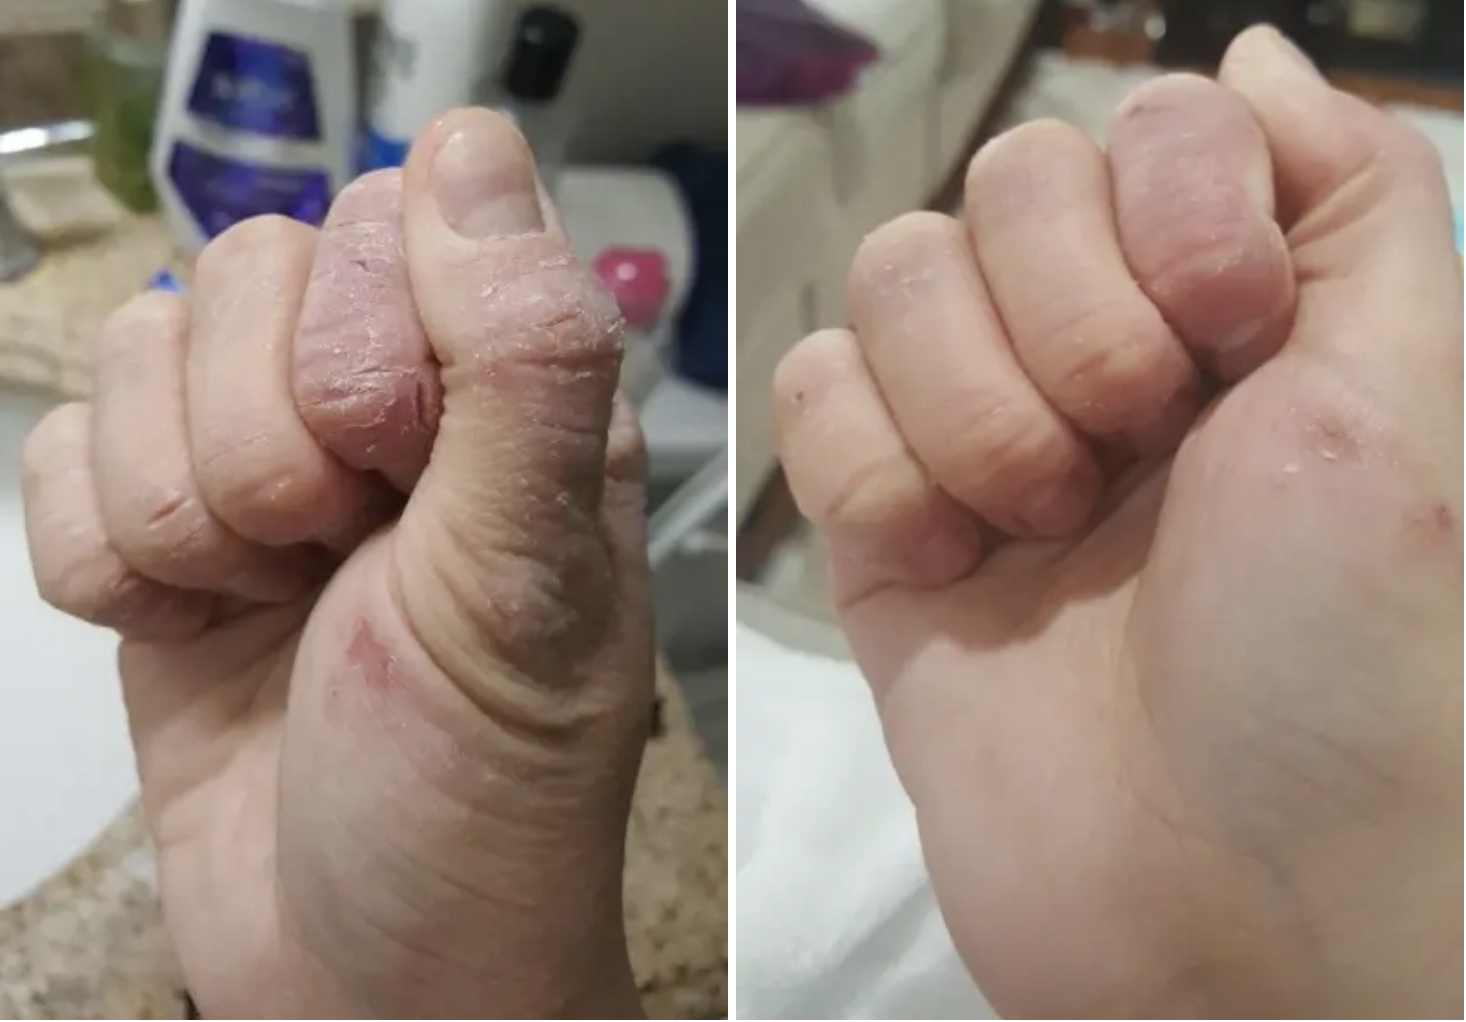 Cracking, dry hands on the left, and the same hands on the right almost completely healed